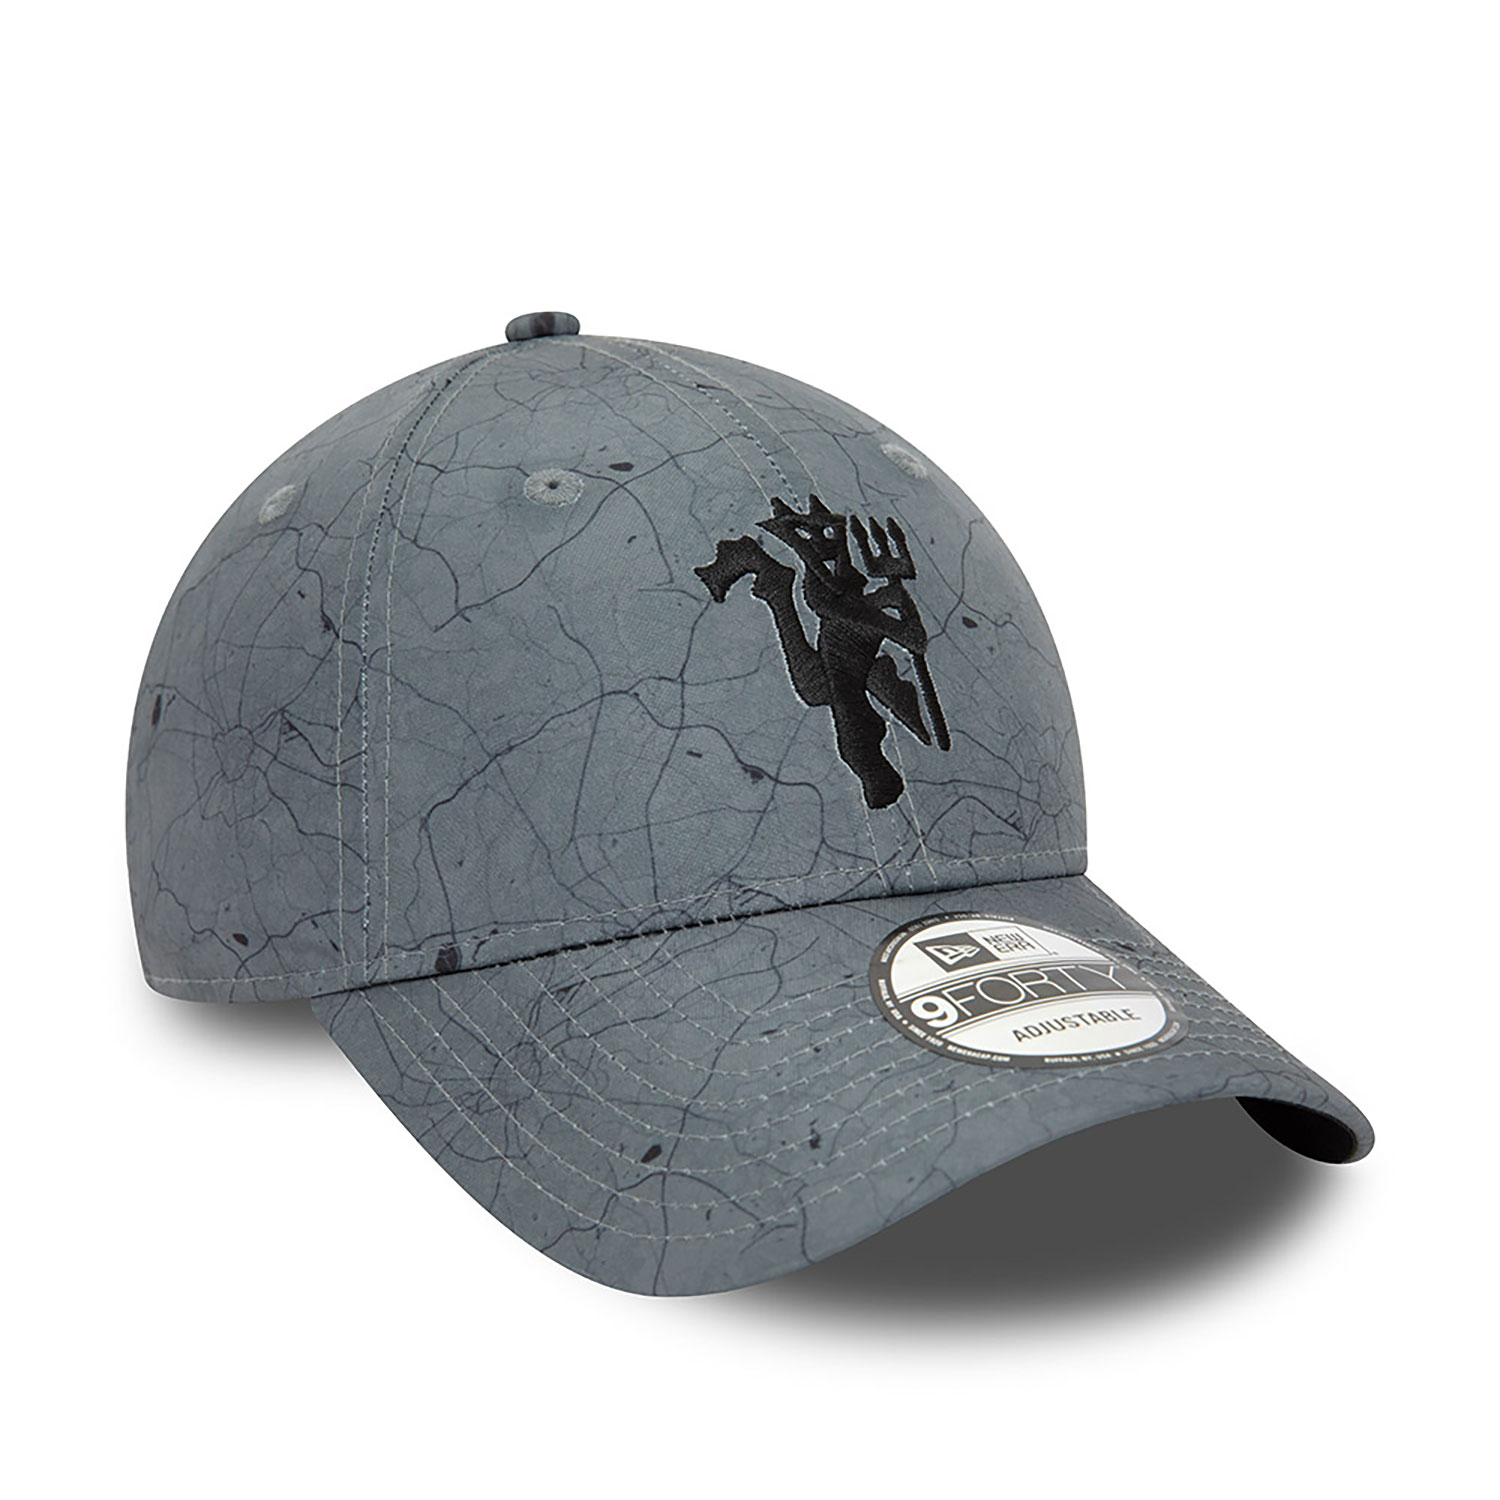 Manchester United FC All Over Print Grey 9FORTY Adjustable Cap